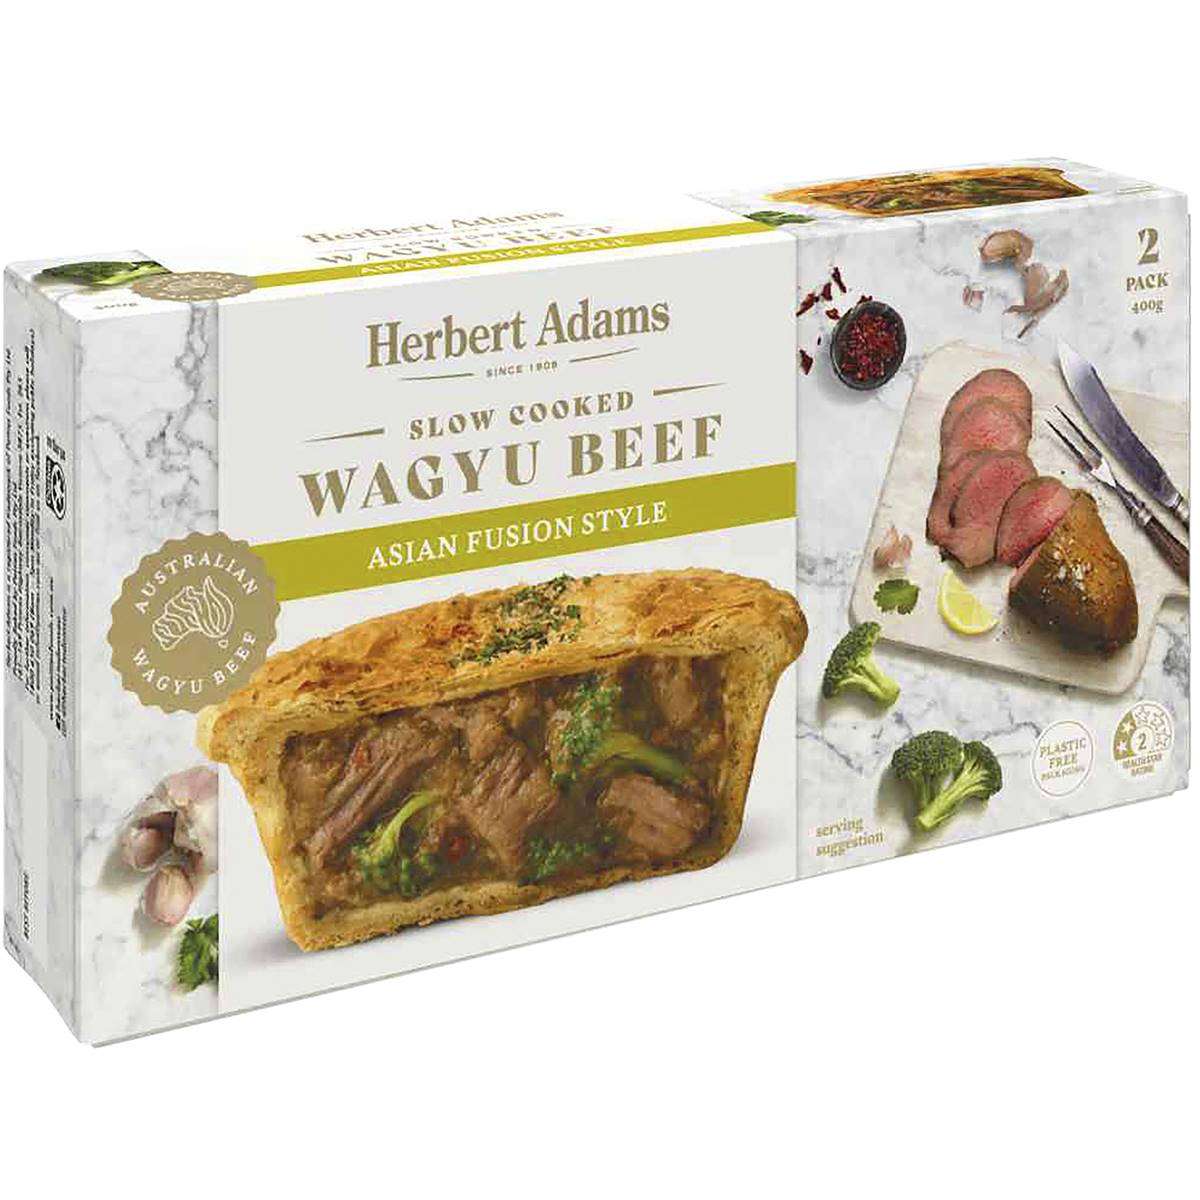 Calories in Herbert Adams Slow Cooked Wagyu Beef Asian Fusion Style Pies